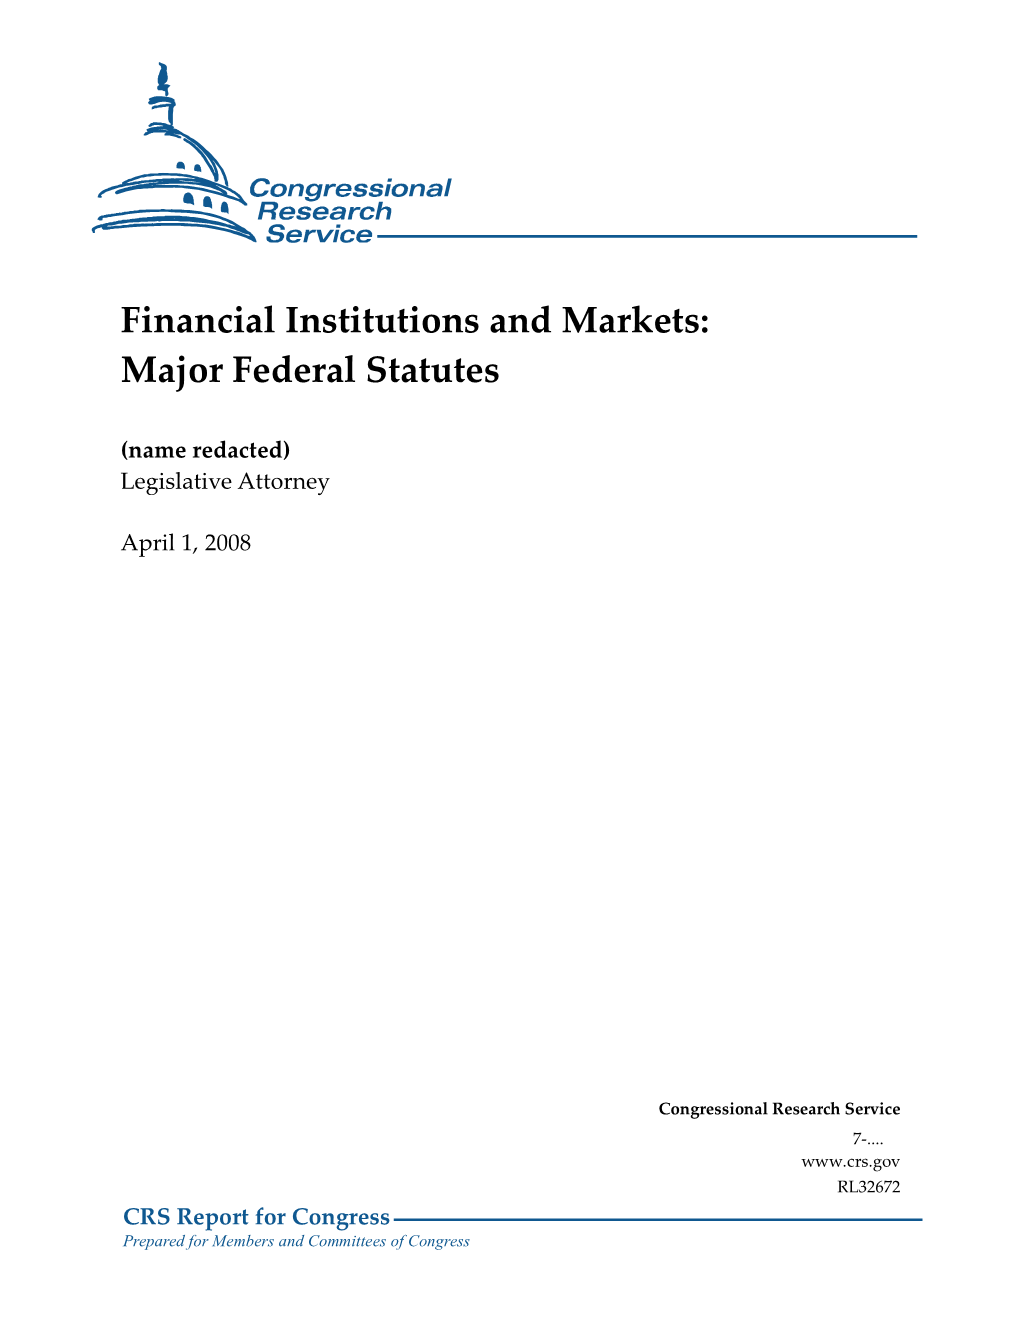 Financial Institutions and Markets: Major Federal Statutes